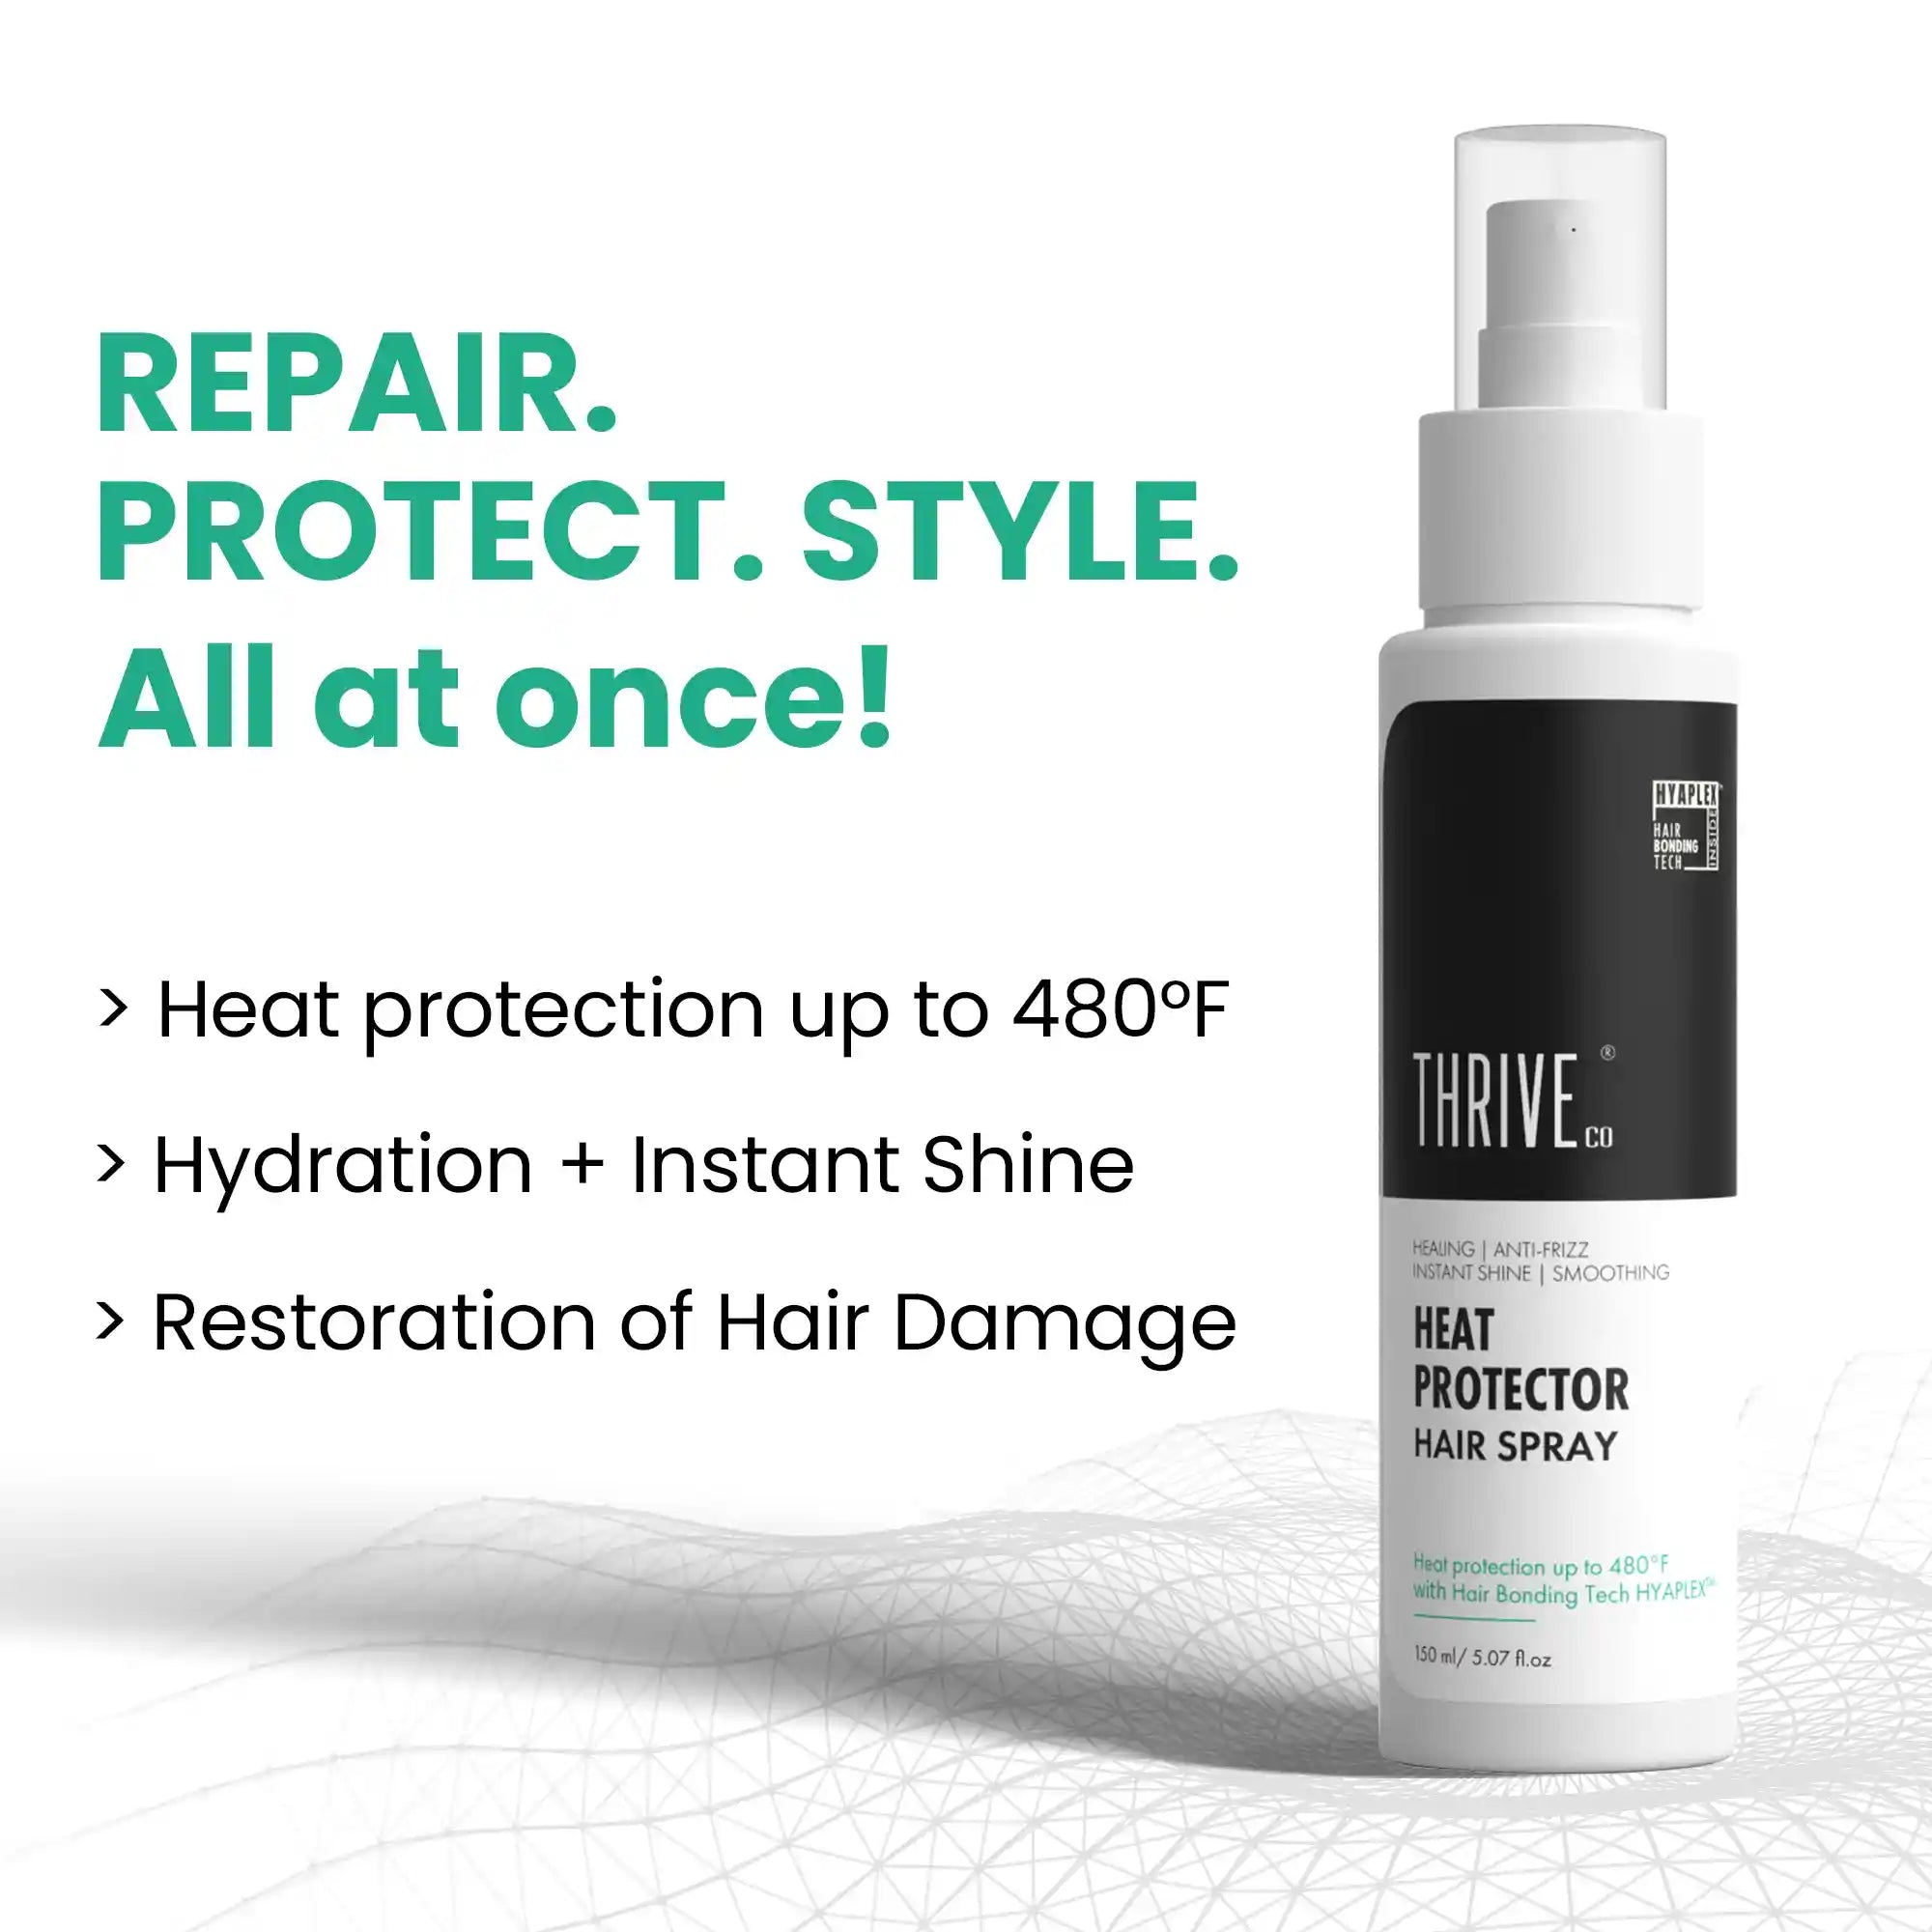 thriveco heat protector hair spray for heat protection